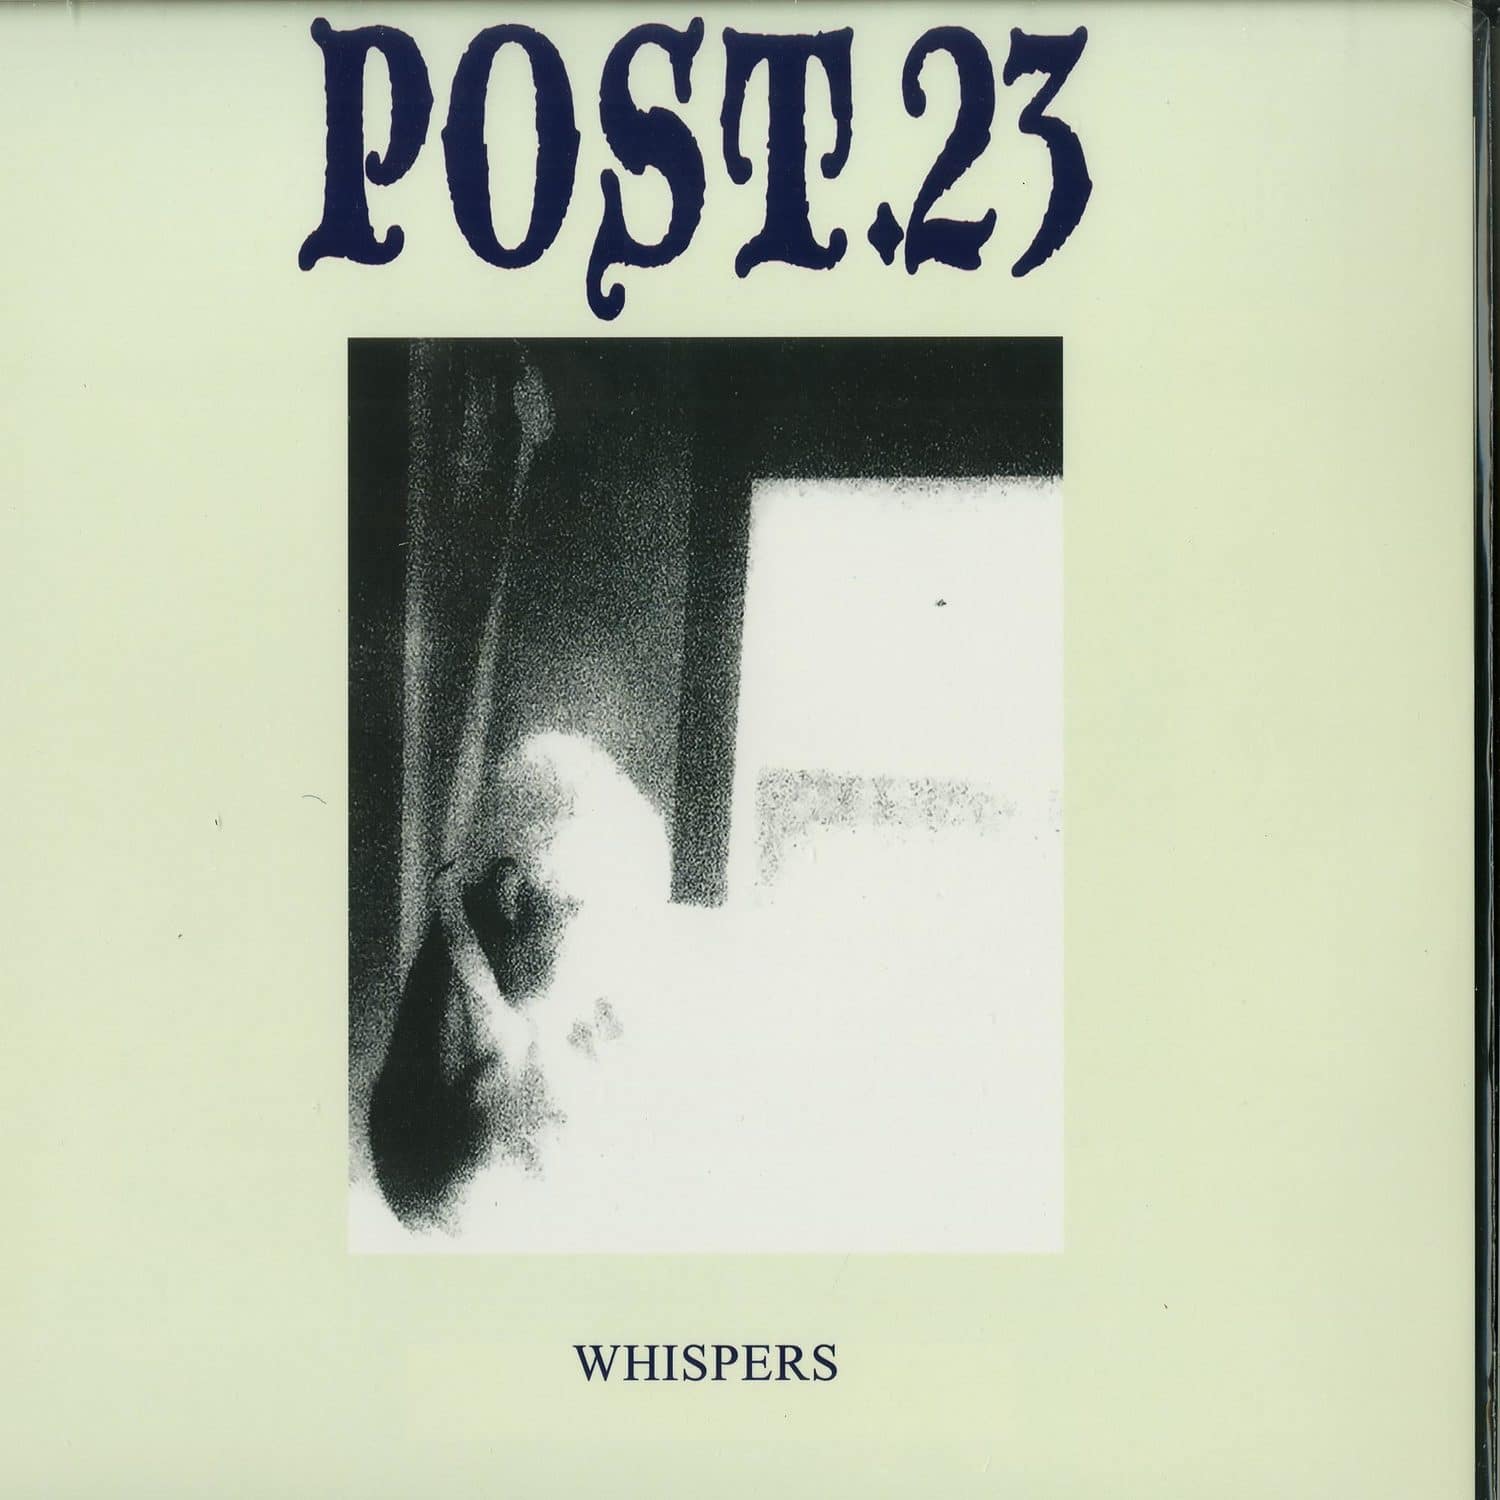 Post.23 - WHISPERS